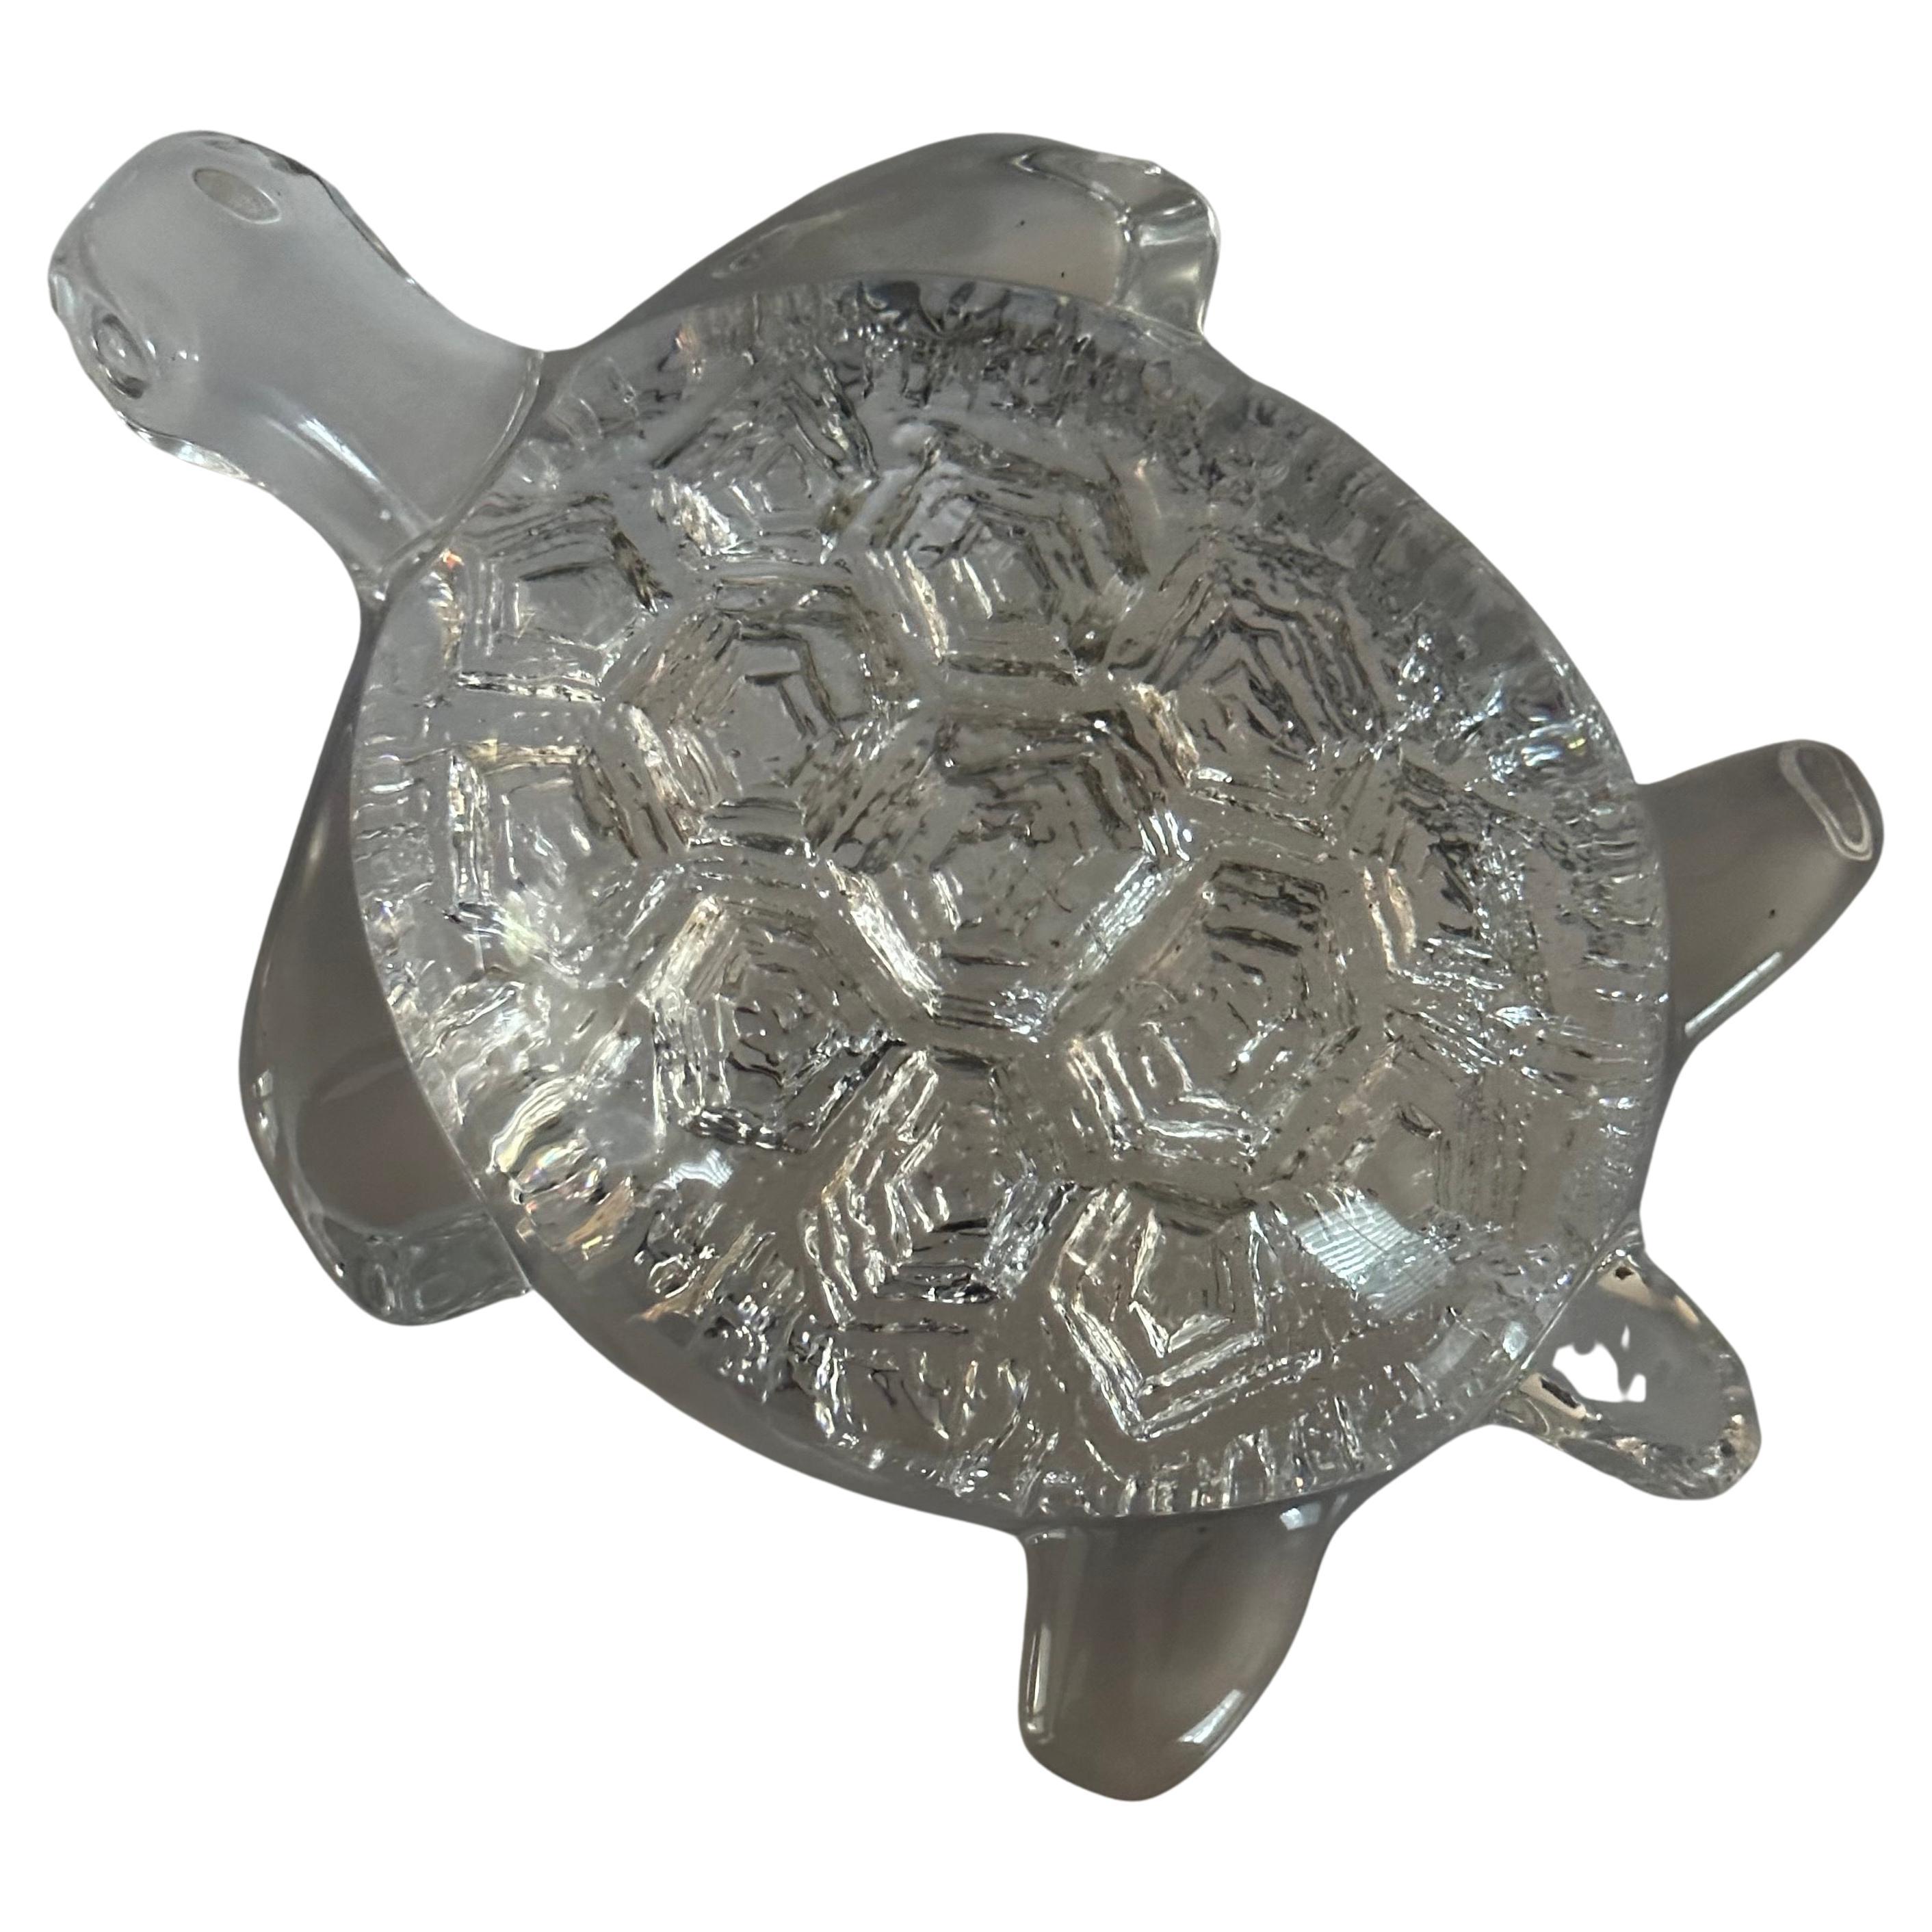 Stylized crystal turtle sculpture / paperweight by Daum France, circa 1980s. The sculpture is in very good condition with no chips or scratches and measures: 7.5